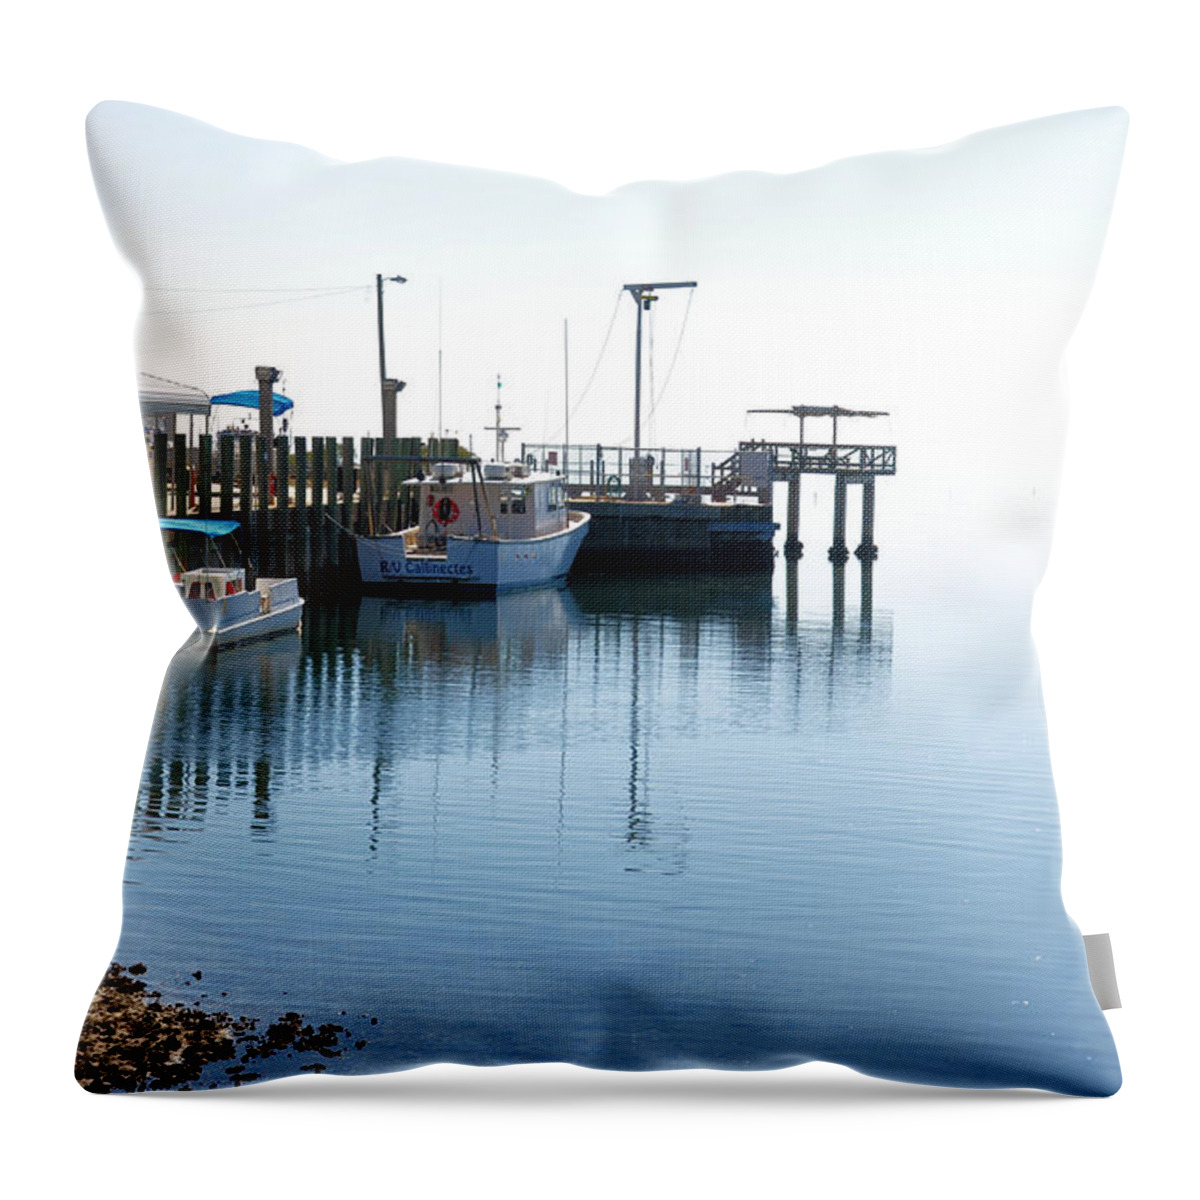 Seascapes Throw Pillow featuring the photograph Infinity by Jan Amiss Photography